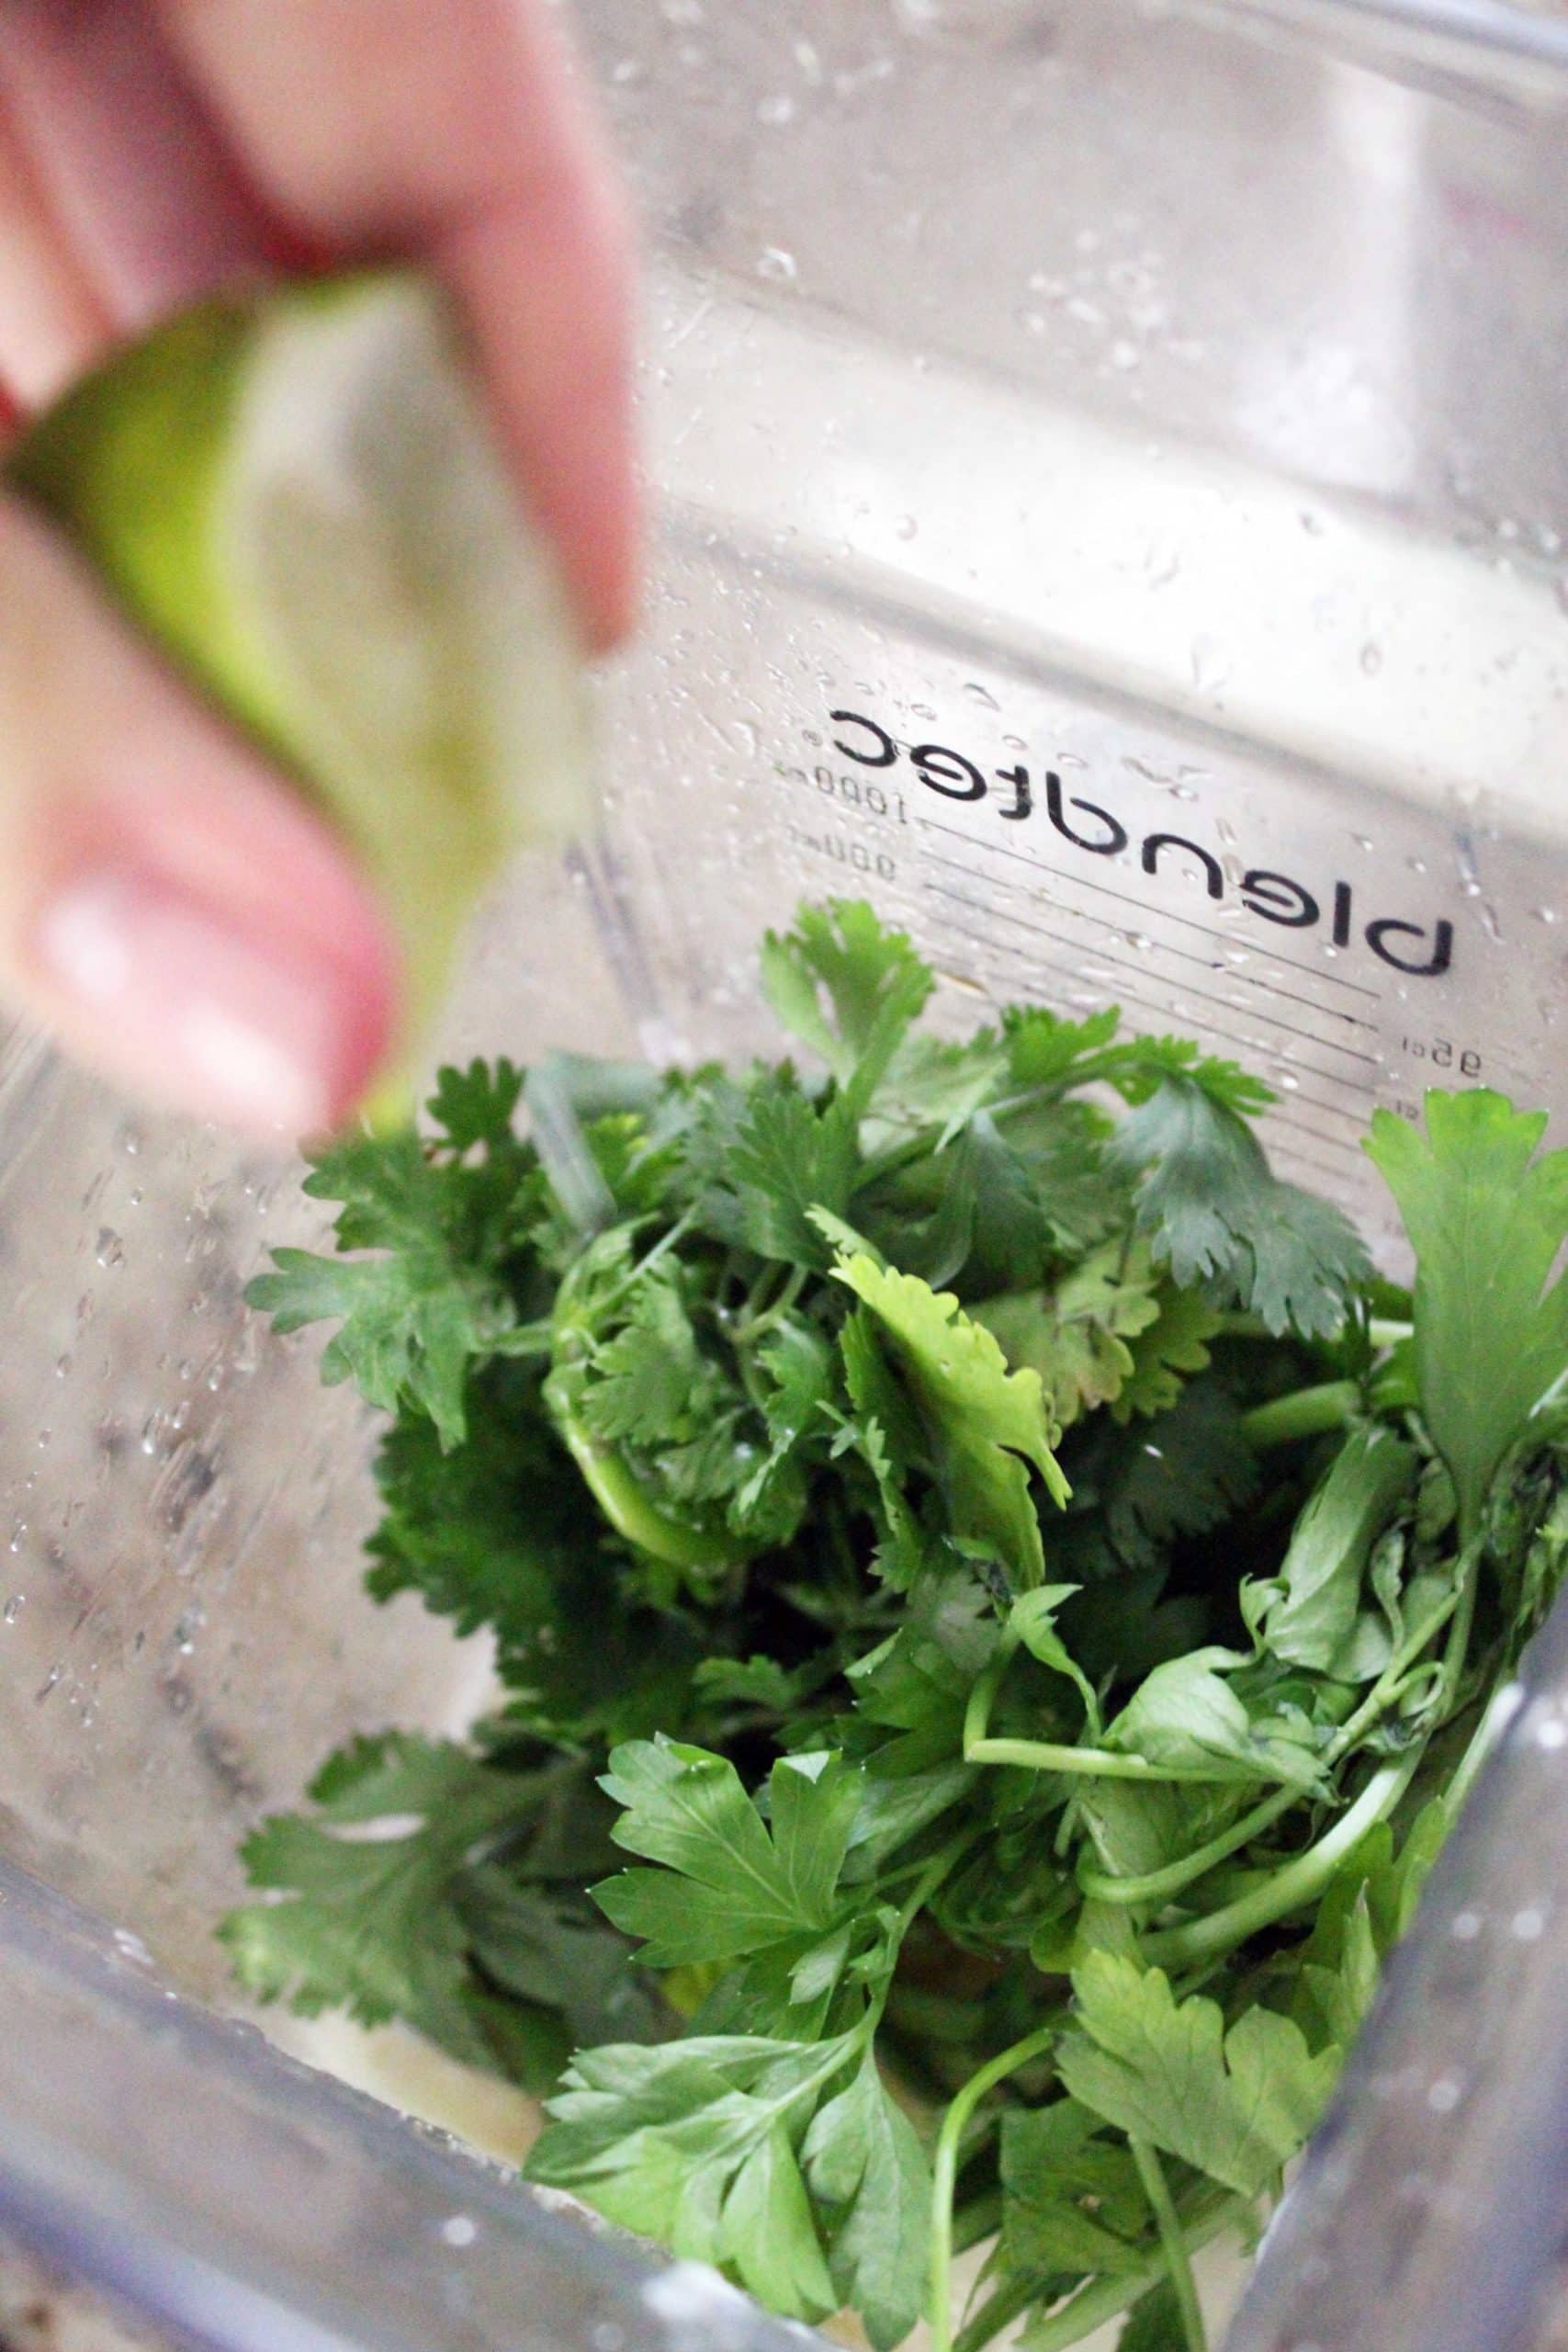 fresh herbs in a bundle at the bottom of blender bowl.